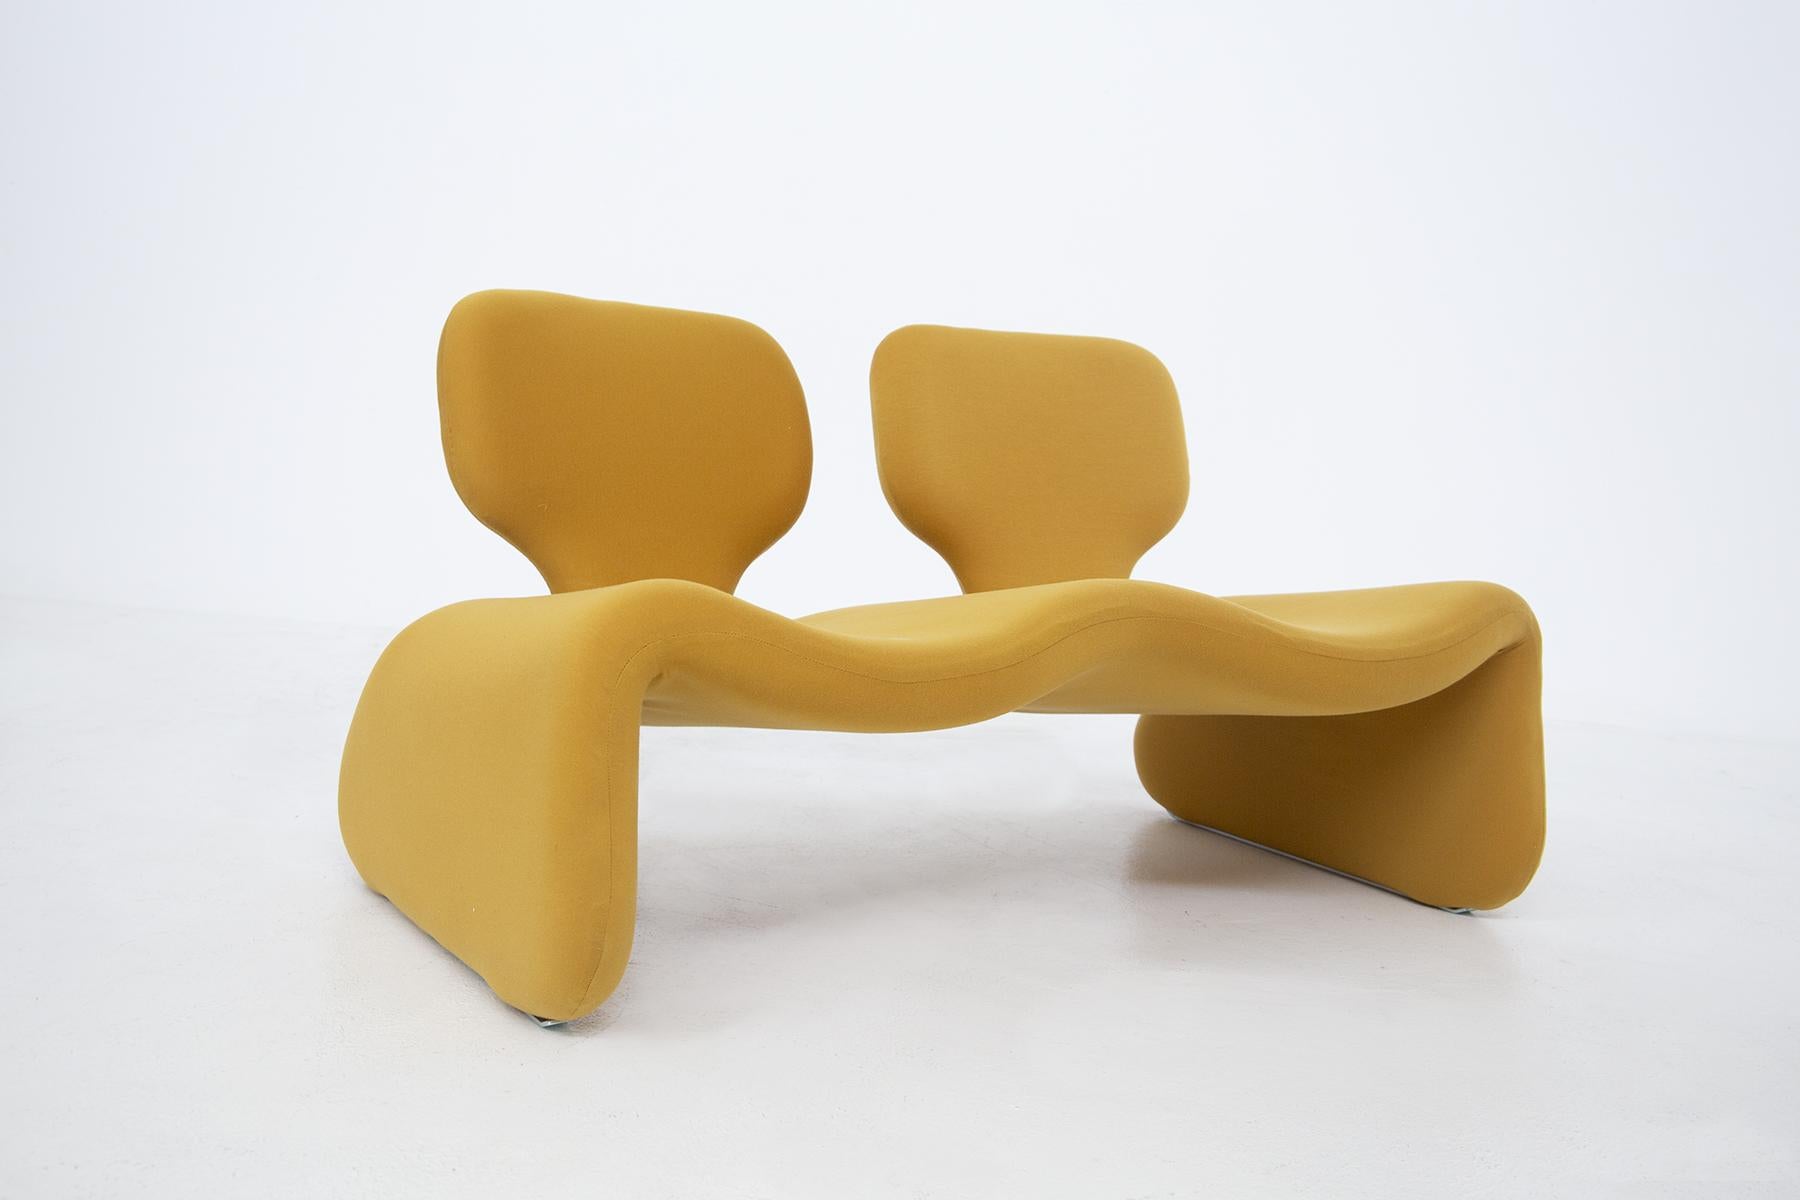 Vintage Djinn two-seater sofa designed by Olivier Mourgue in 1965 for Airborne. Metal frame lined with foam and covered in yellow Kvadrat publisher's fabric. The feet have steel Skates. The Djinn sofa whose shape was inspired by the genies of